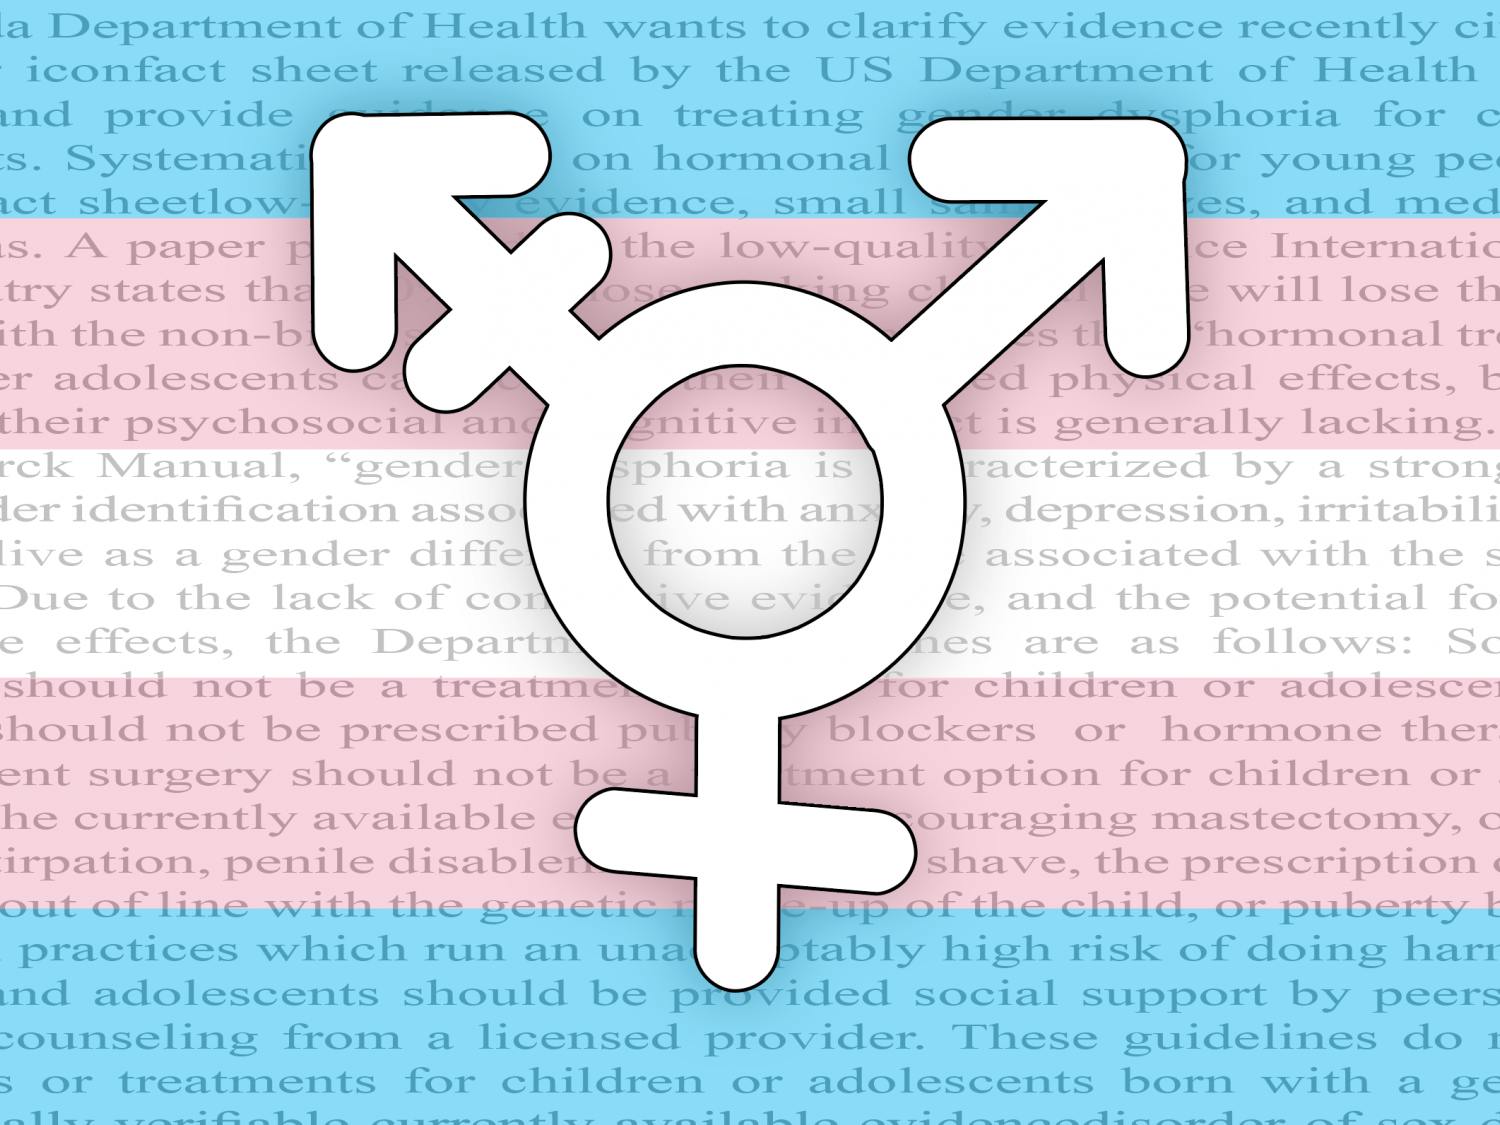 Nine members of the UF wildlife ecology and conservation department’s Inclusion, Diversity, Equity and Access Committee wrote a letter criticizing the guidelines and called upon the UF community to advocate for transgender healthcare access for children.